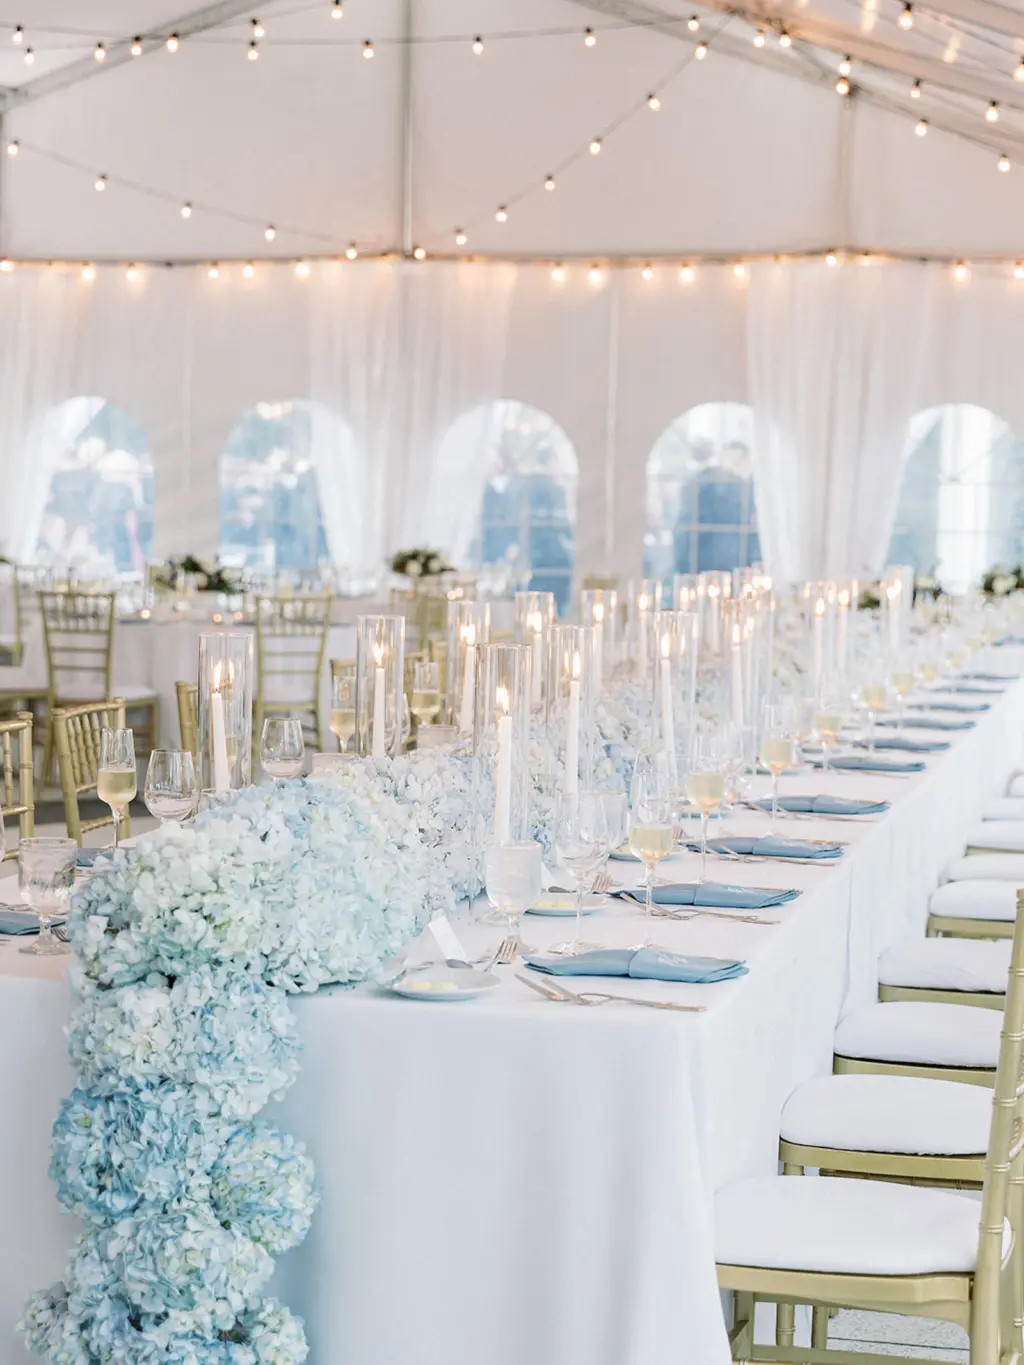 Classic Blue and White Hydrangea Garland Centerpiece with Taper Candles Inside Hurricane Glass Tube for Feasting Table | Classic Blue and White Tented Wedding Reception Inspiration | Tampa Bay Florist Save The Date Florida | Planner EventFull Weddings